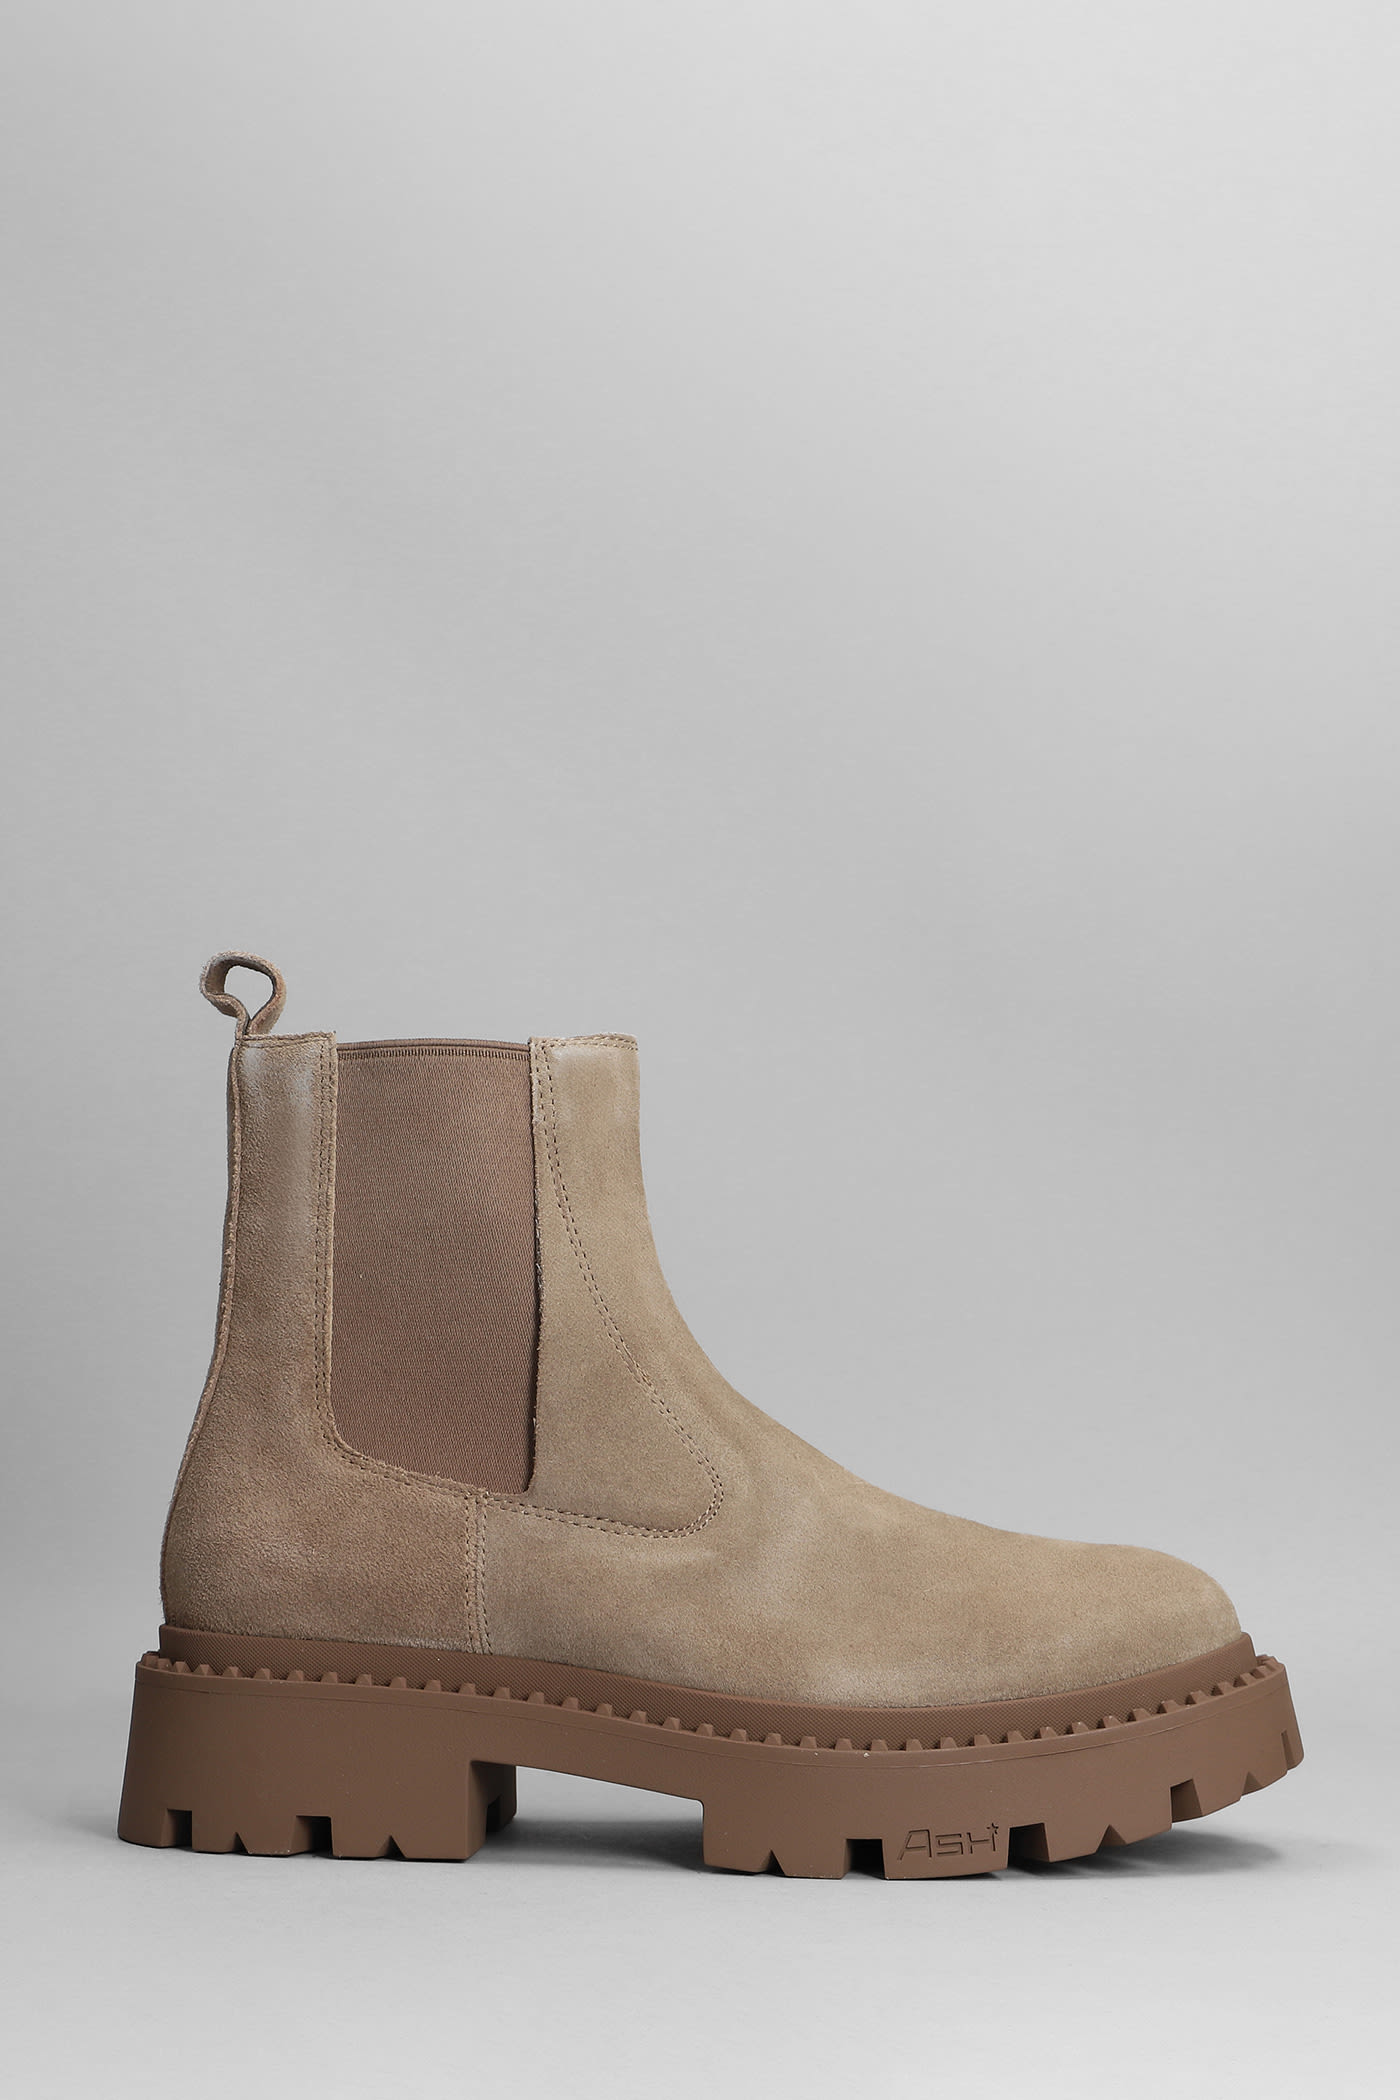 Ash Genesis Combat Boots In Taupe Suede